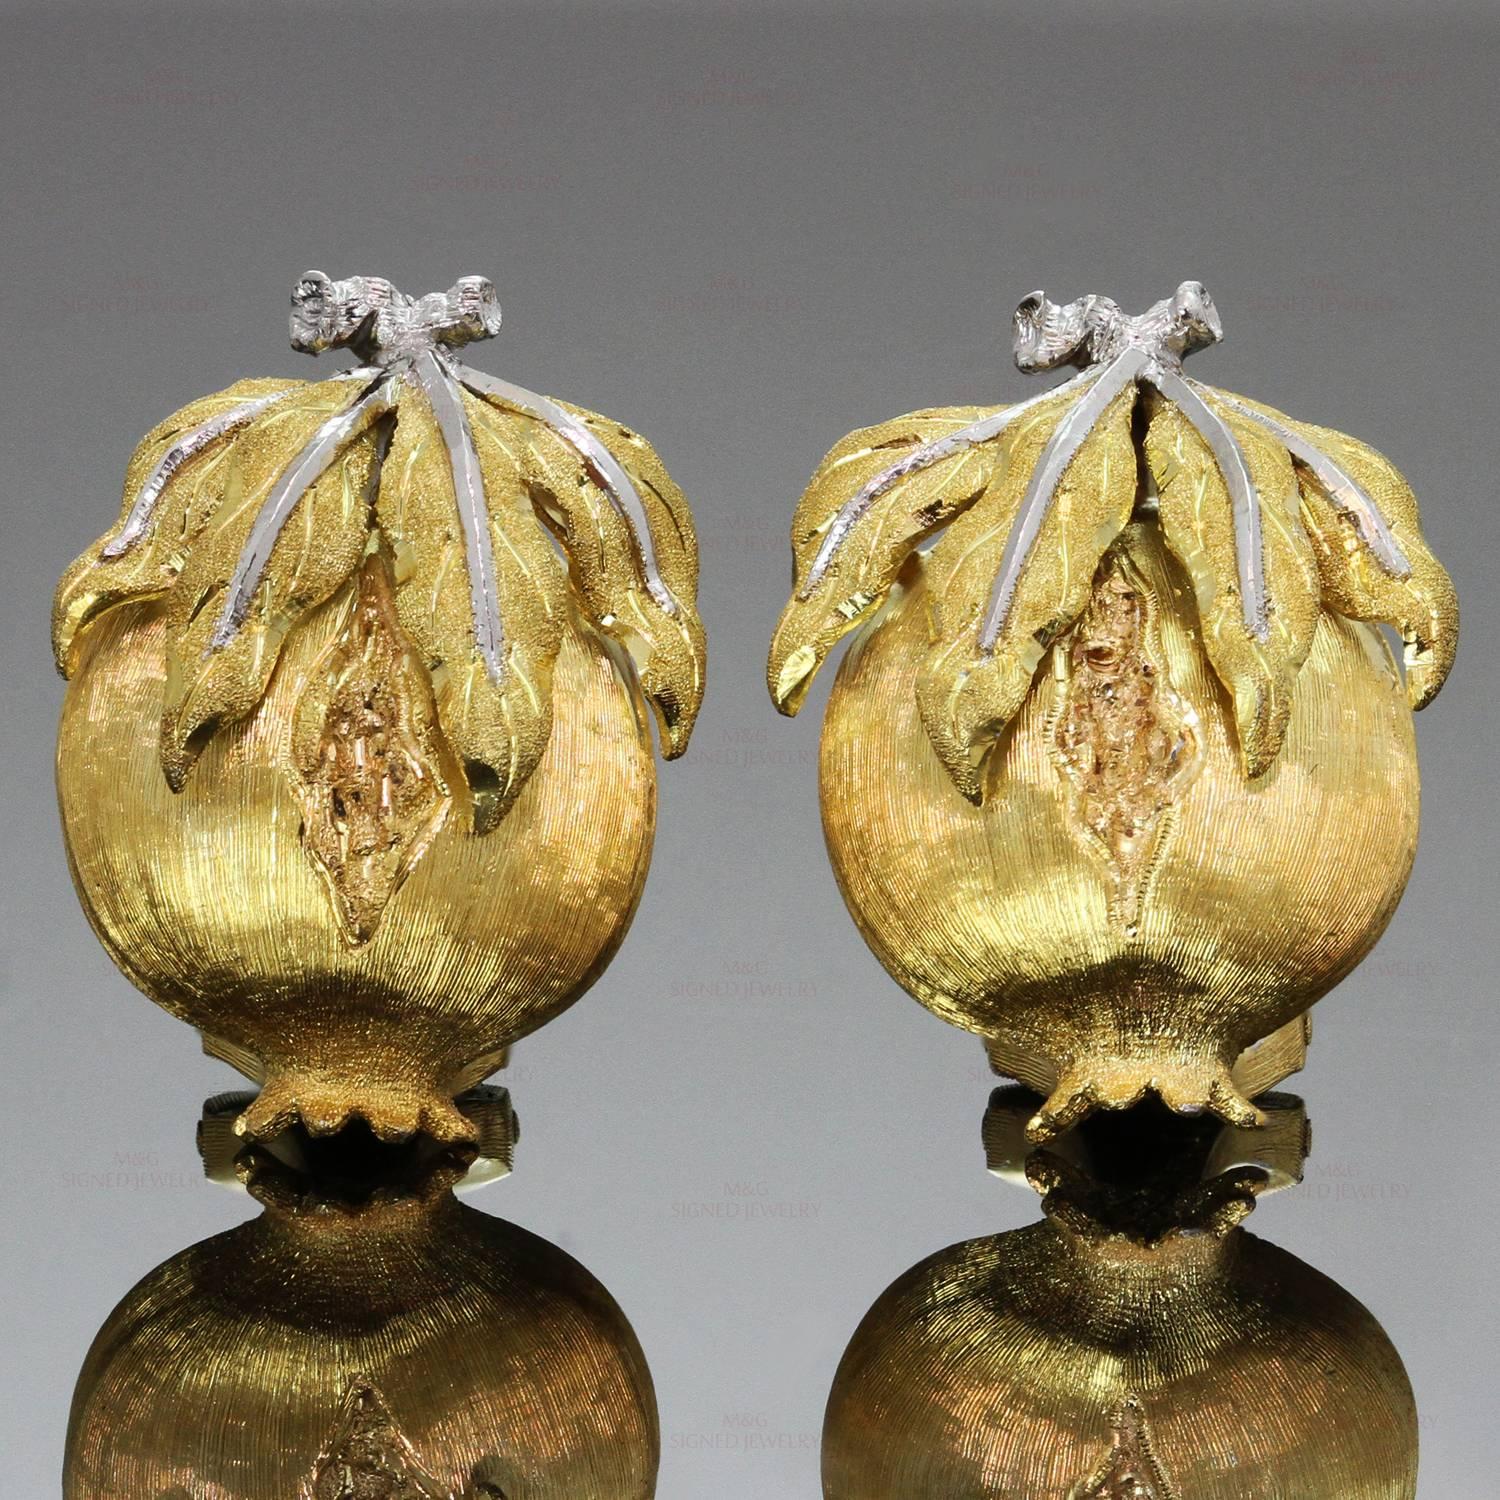 These stunning Buccellati clip-on earrings feature a textured pomegranate design crafted in 18k yellow gold with 18k white gold accents. Made in Italy circa 2016. Measurements: 0.59